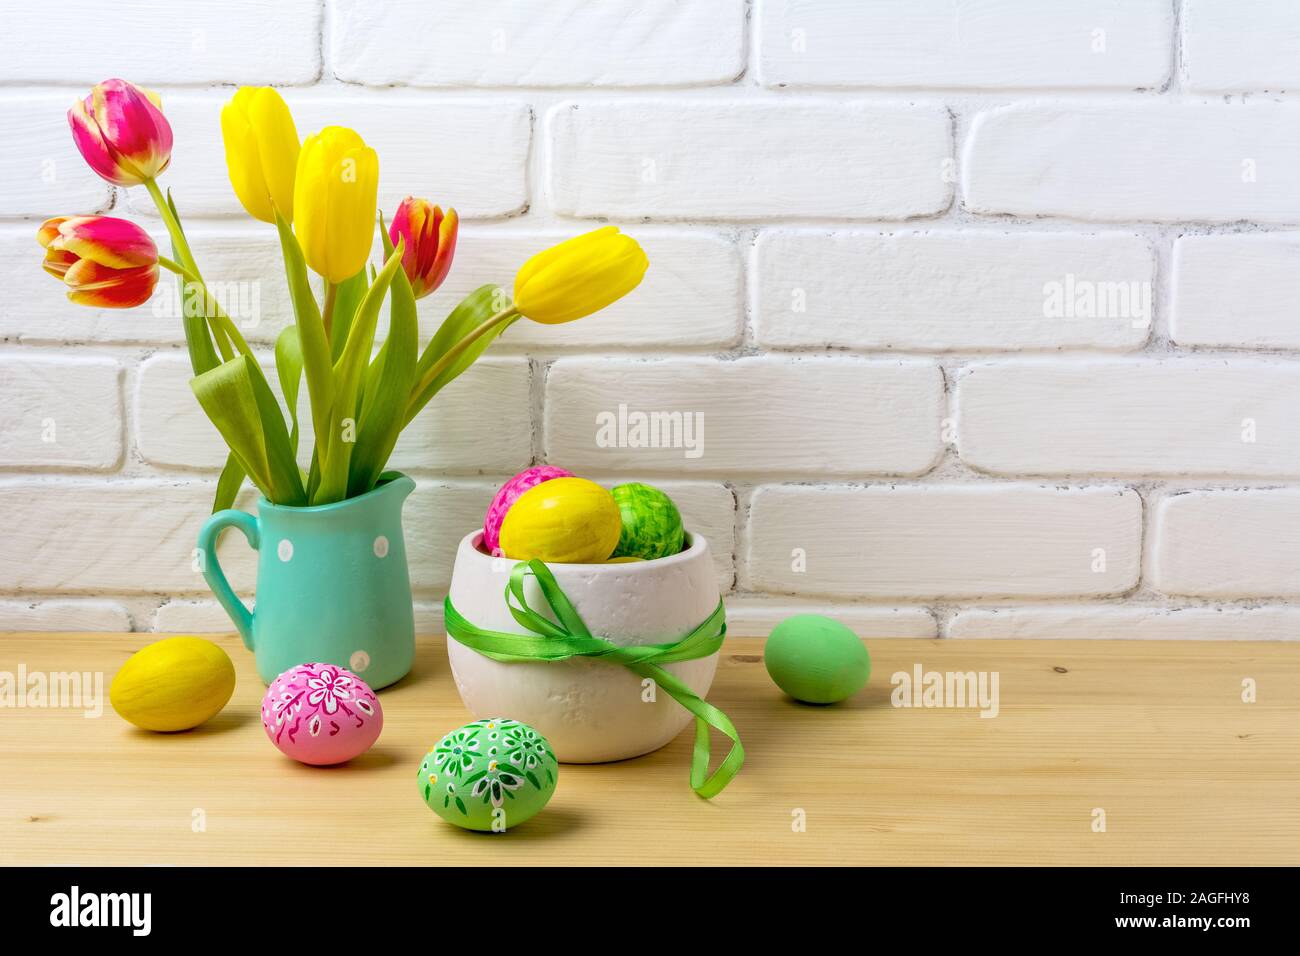 Easter rustic centerpiece with decorated eggs, green ribbon, red and yellow tulips in the polka dot mint green jug near painted brick wall Stock Photo